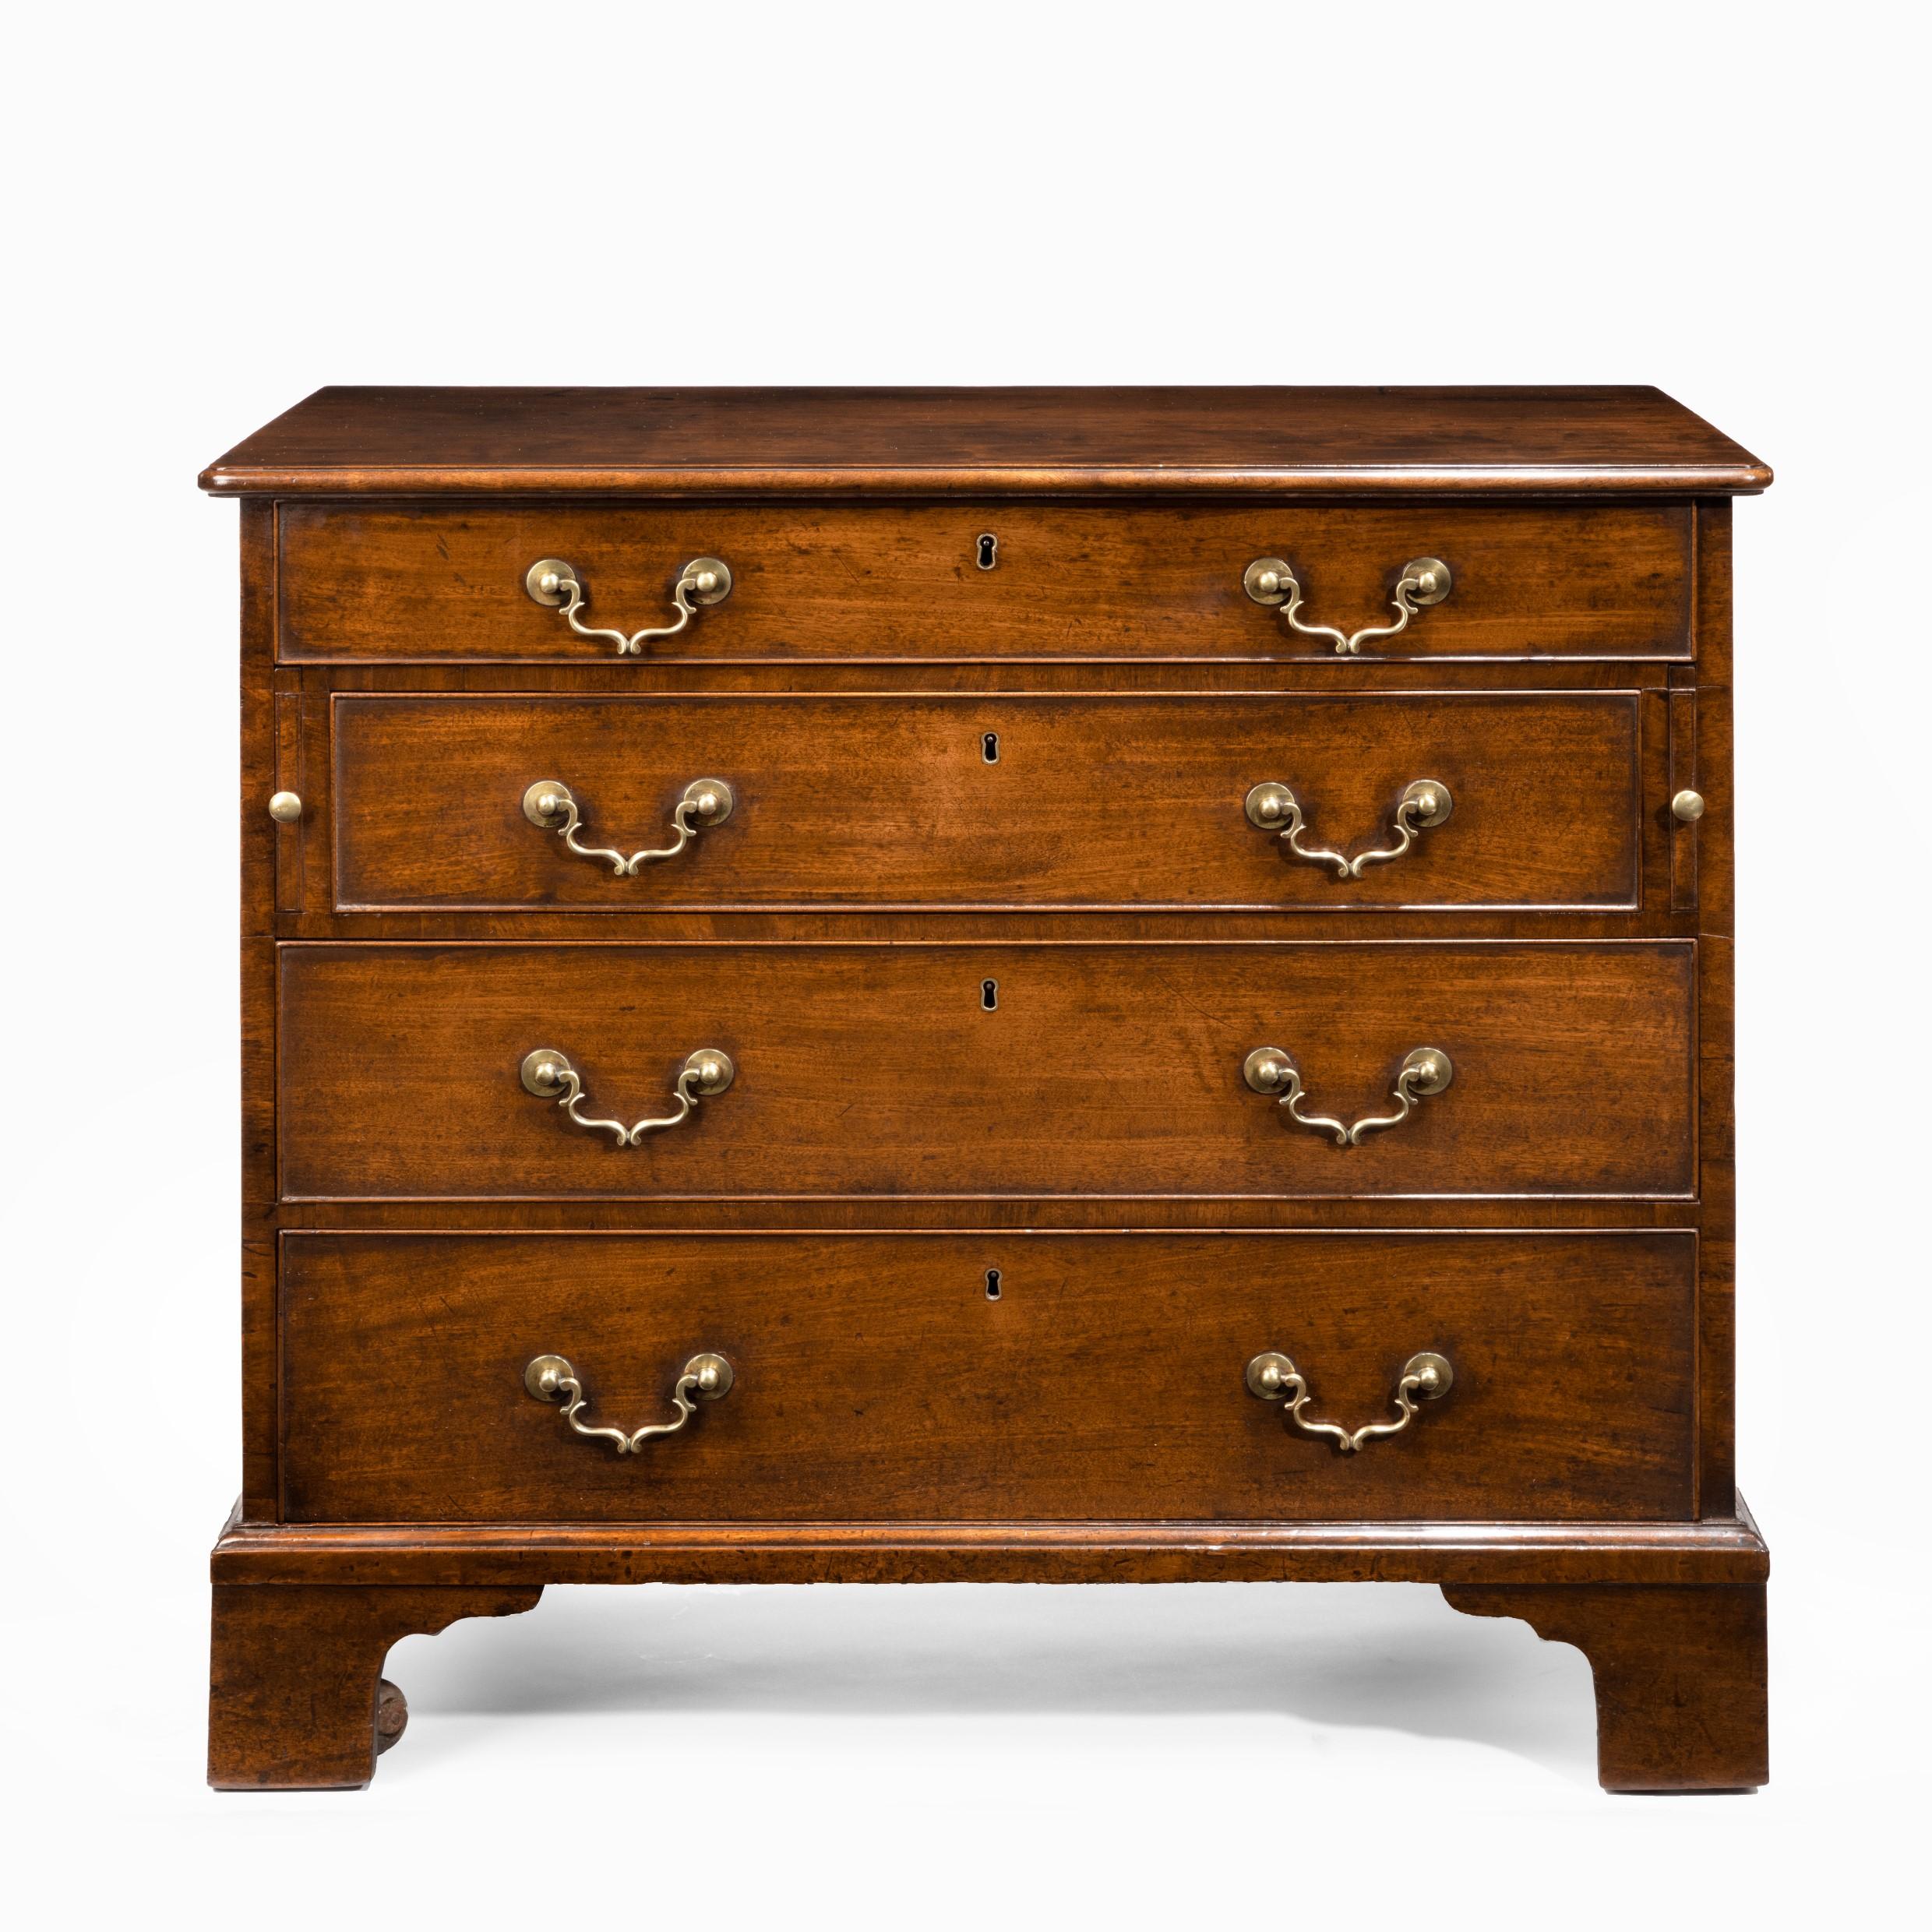 English George III, Chippendale Period, Mahogany Chest of Drawers